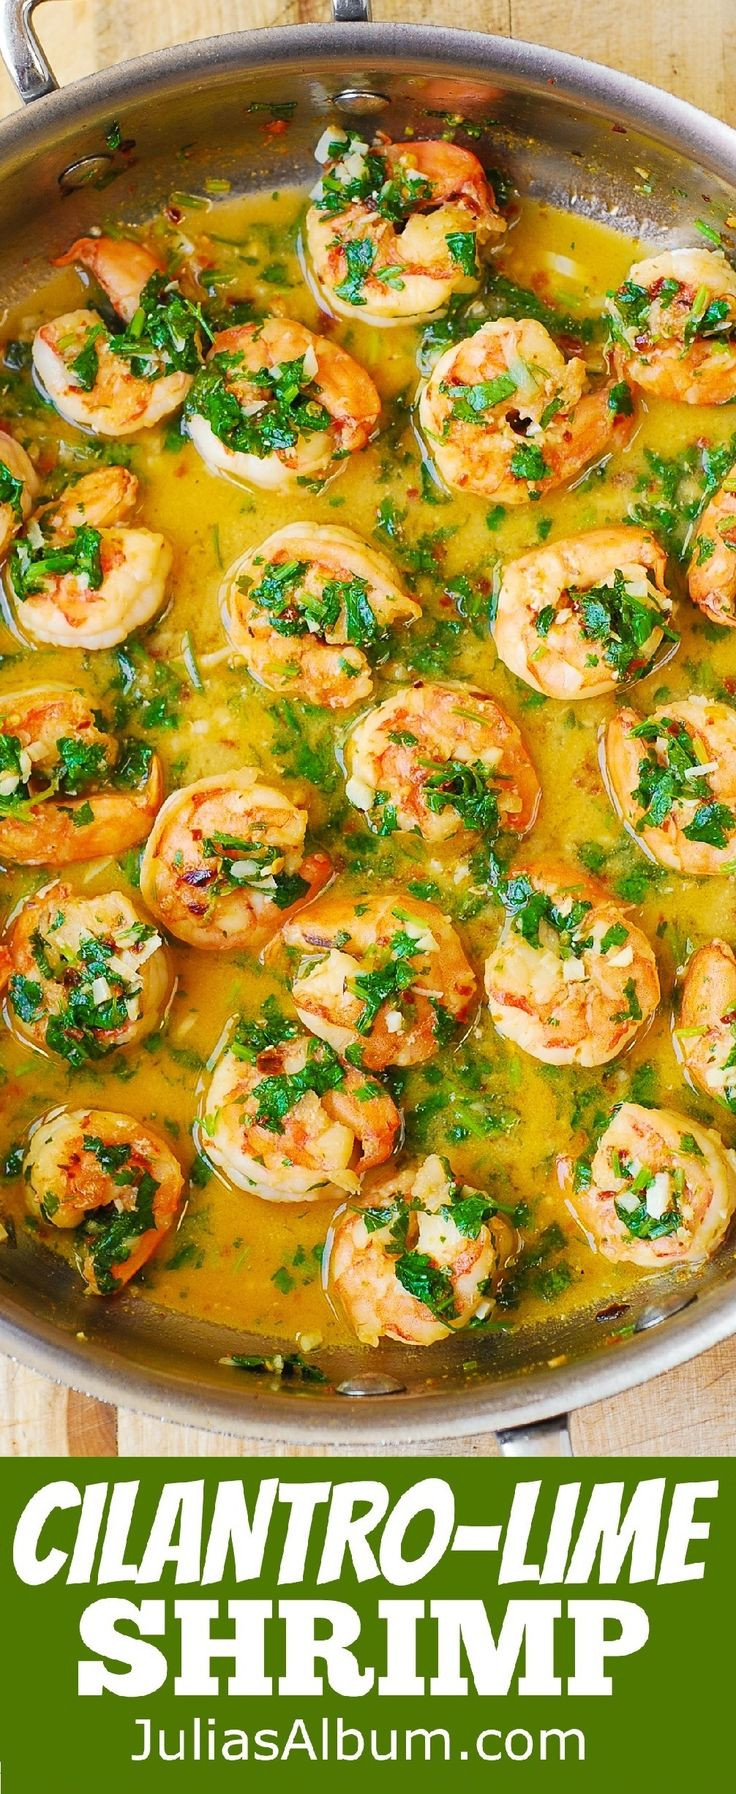 Easy Low Cholesterol Recipes For Dinner
 100 Healthy Shrimp Recipes on Pinterest